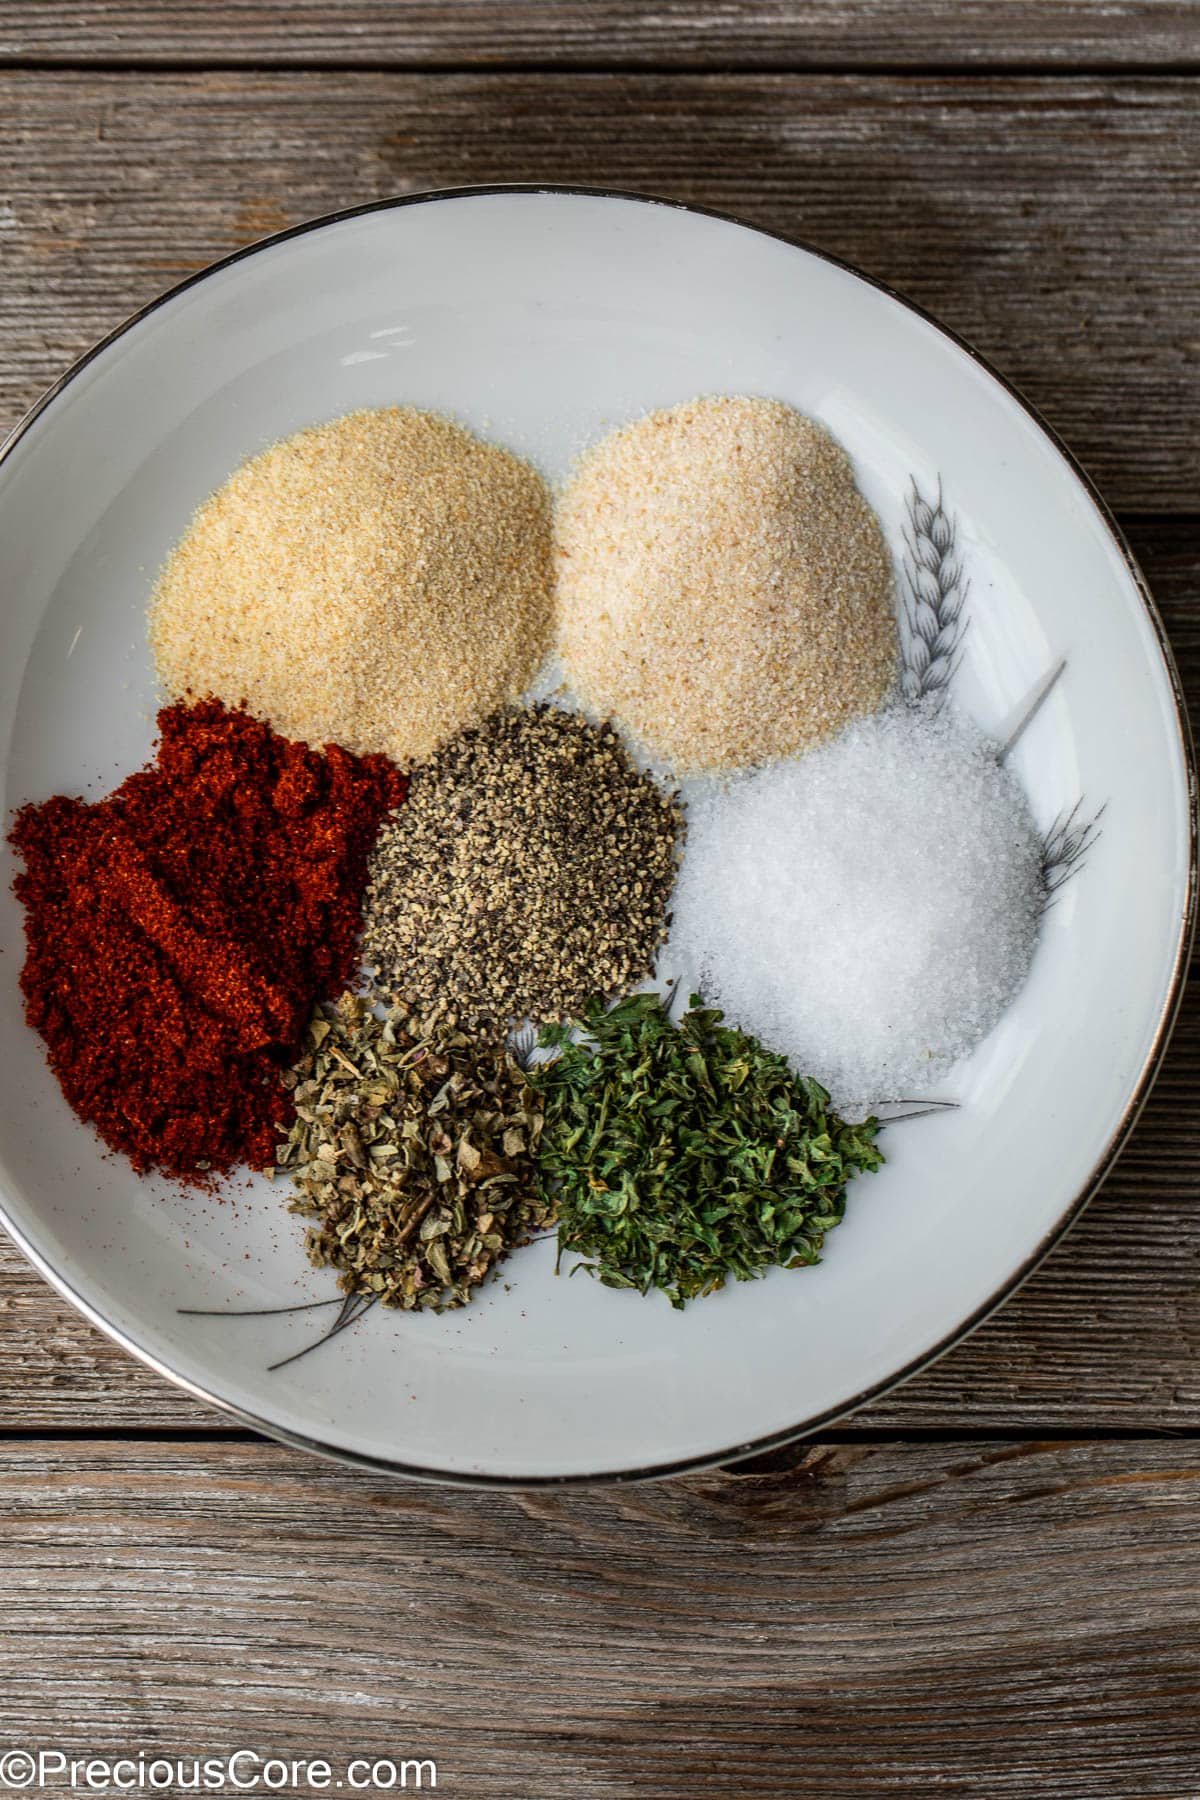 Various spices on a plate.